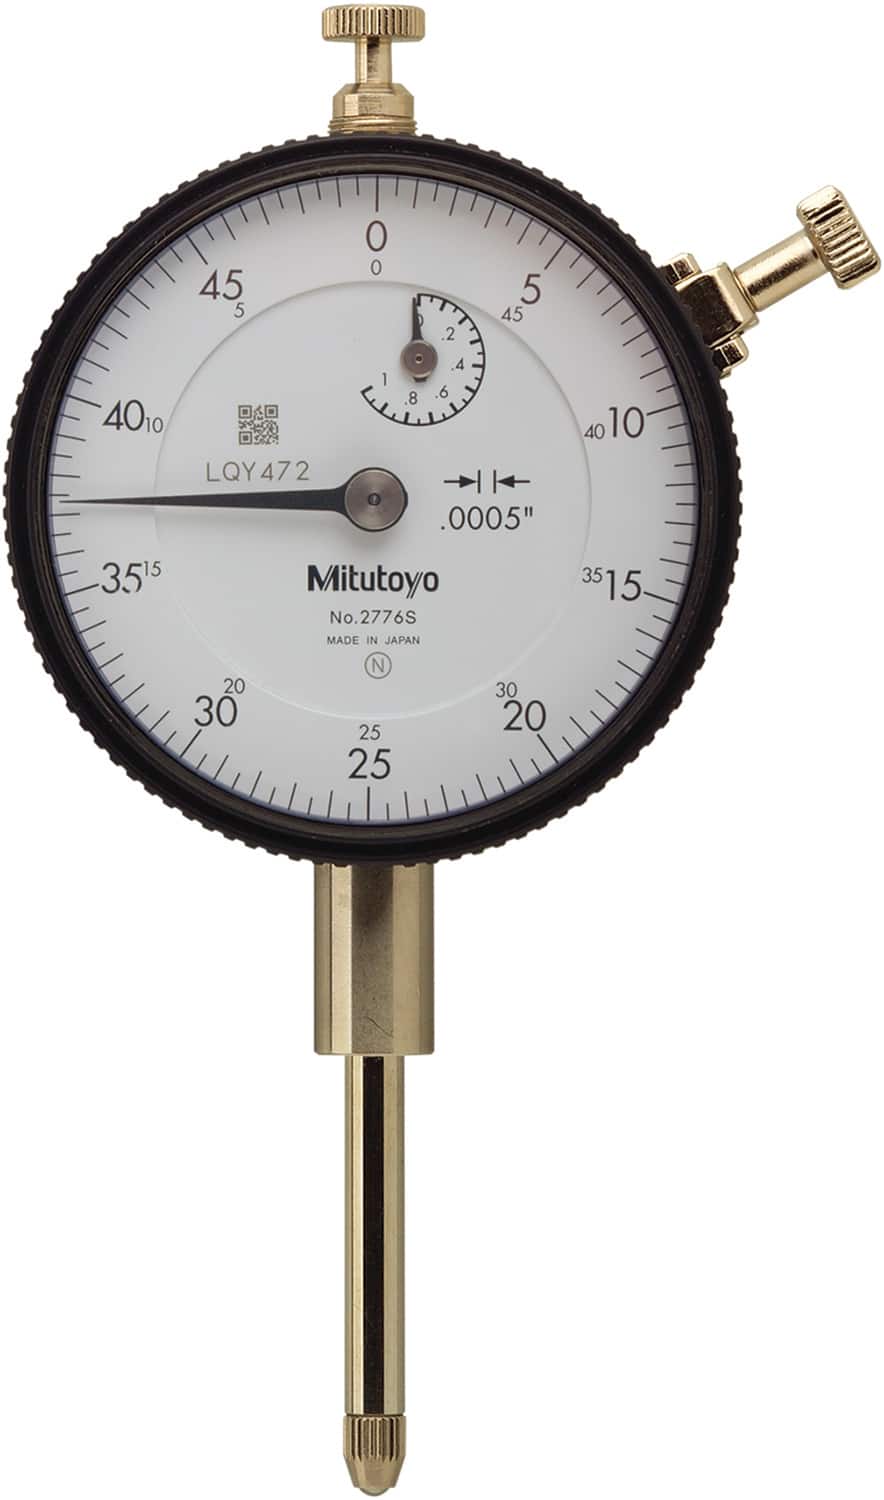 MSC 1 Inch Long Shell dial Drop Indicator Contact Point # 97984769 Mitutoyo 